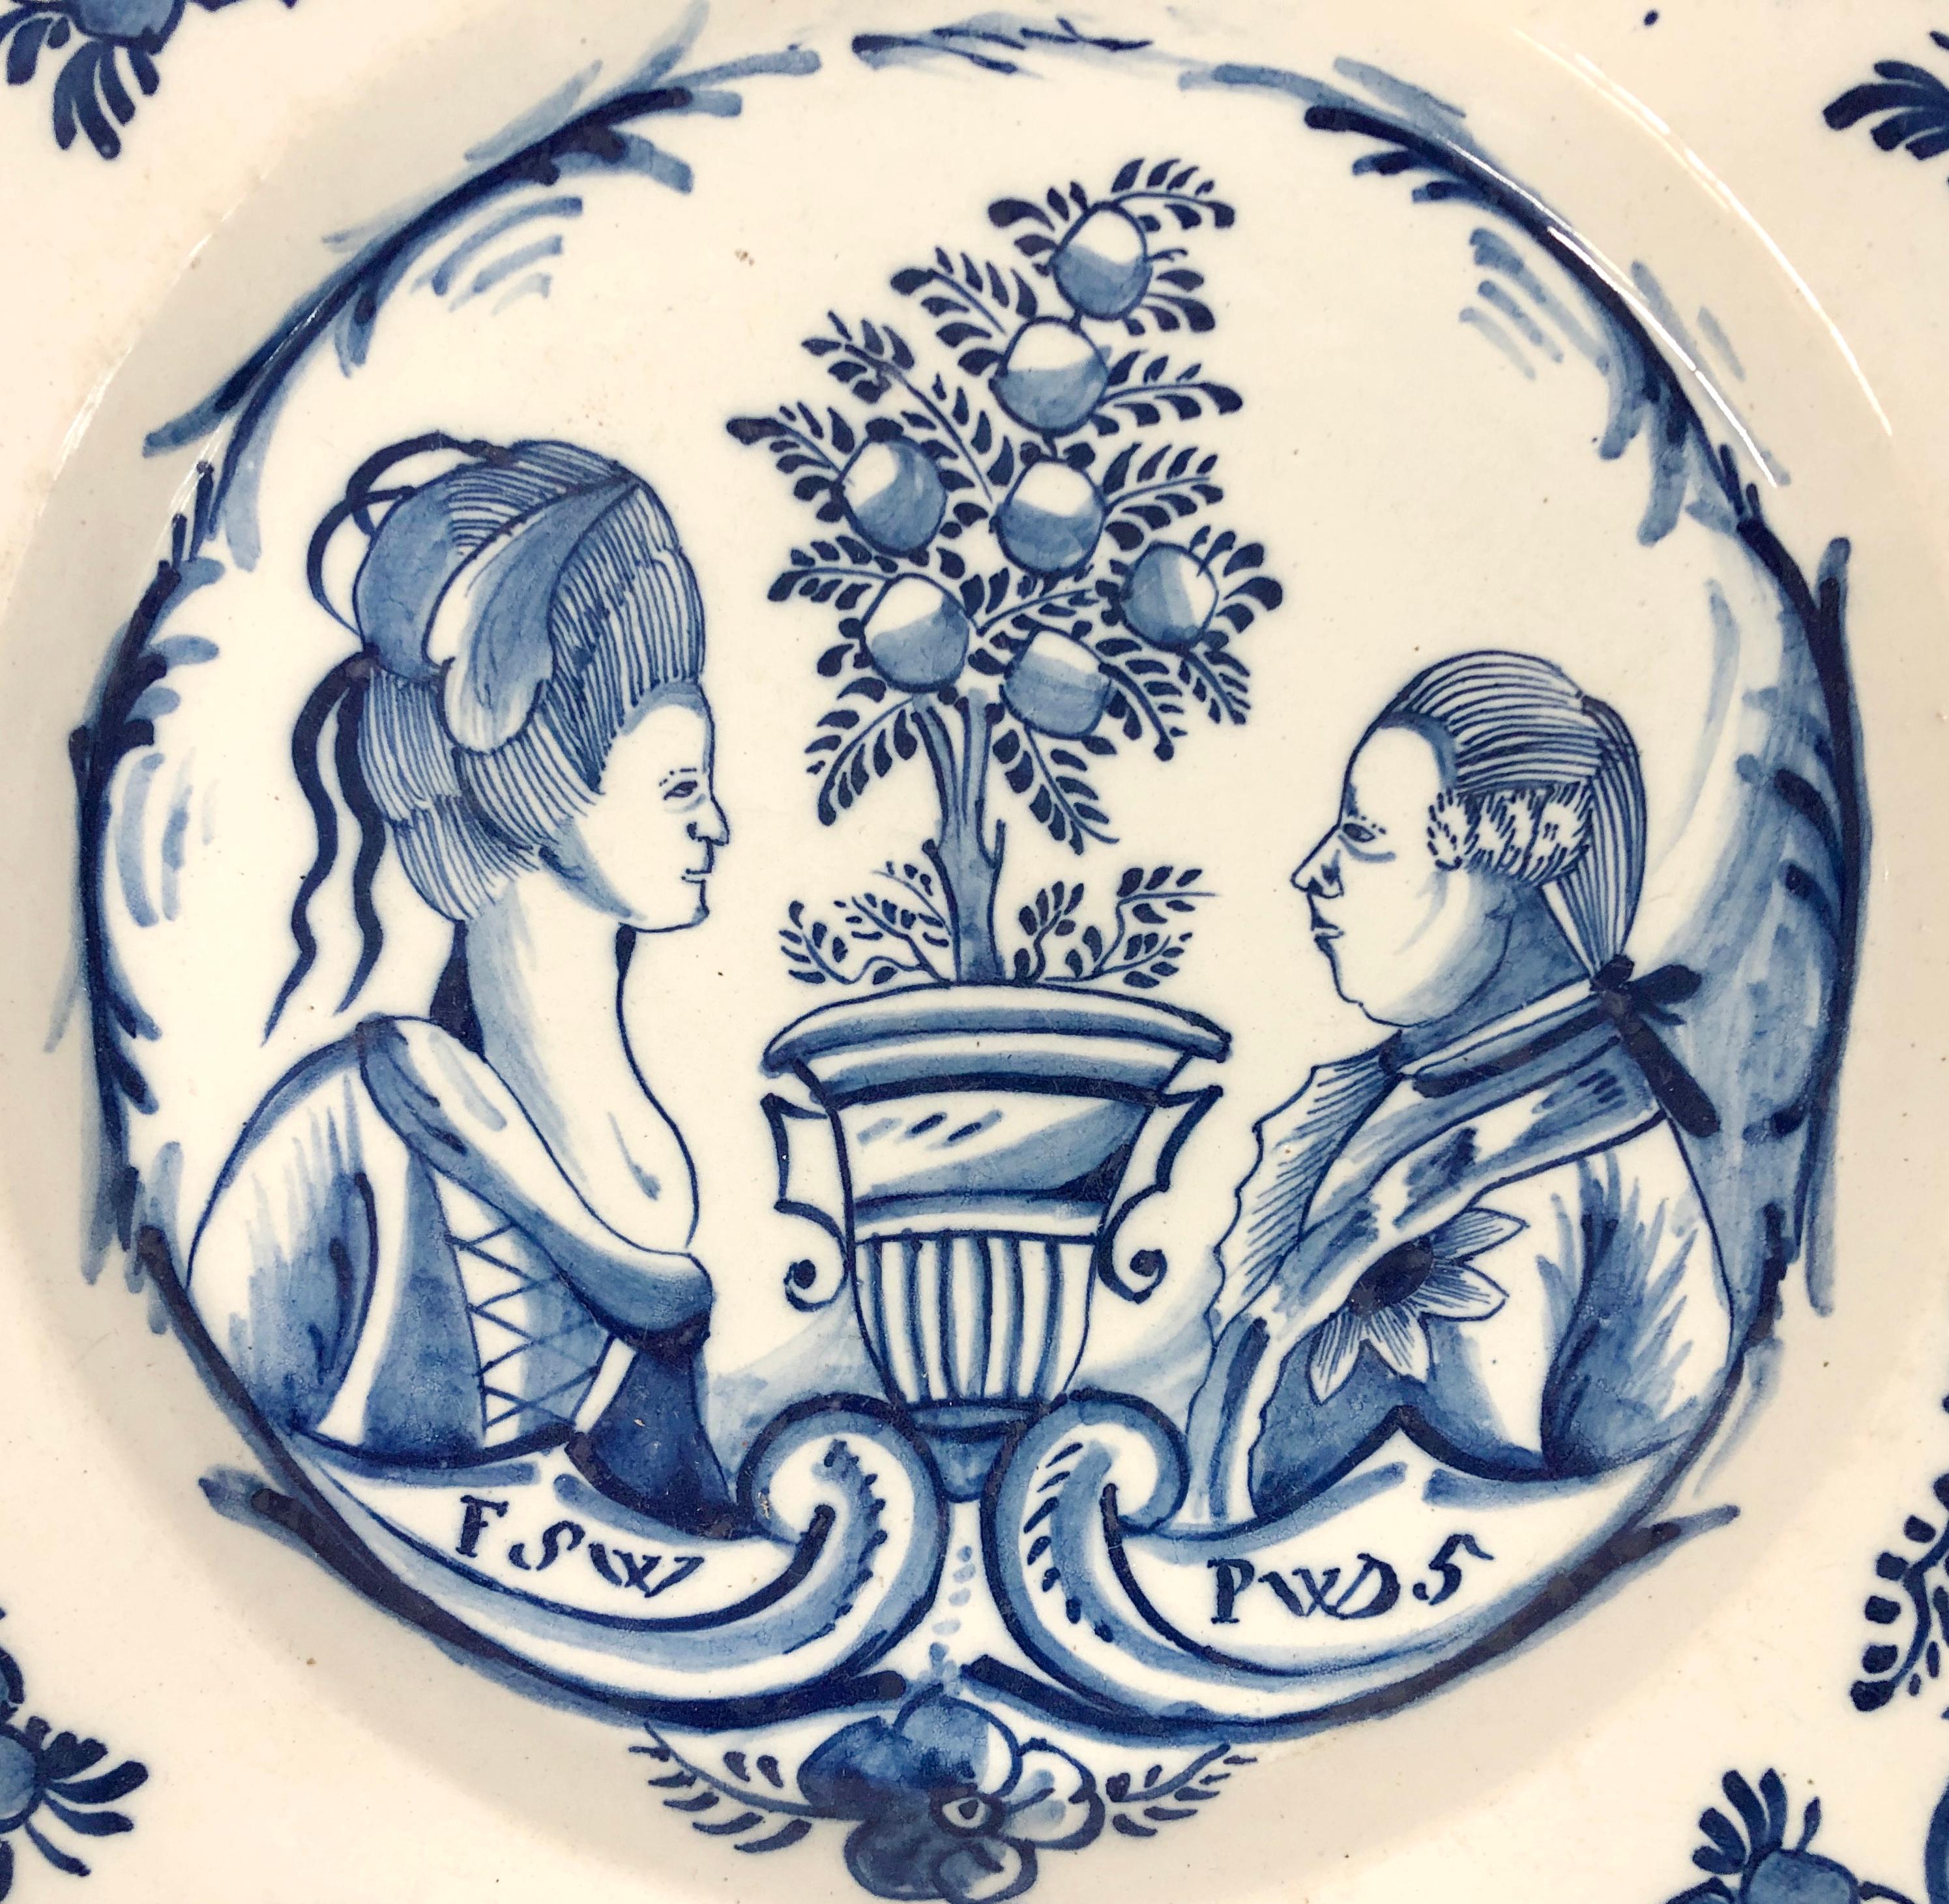 Painted in blue and white depicting the double portrait of 